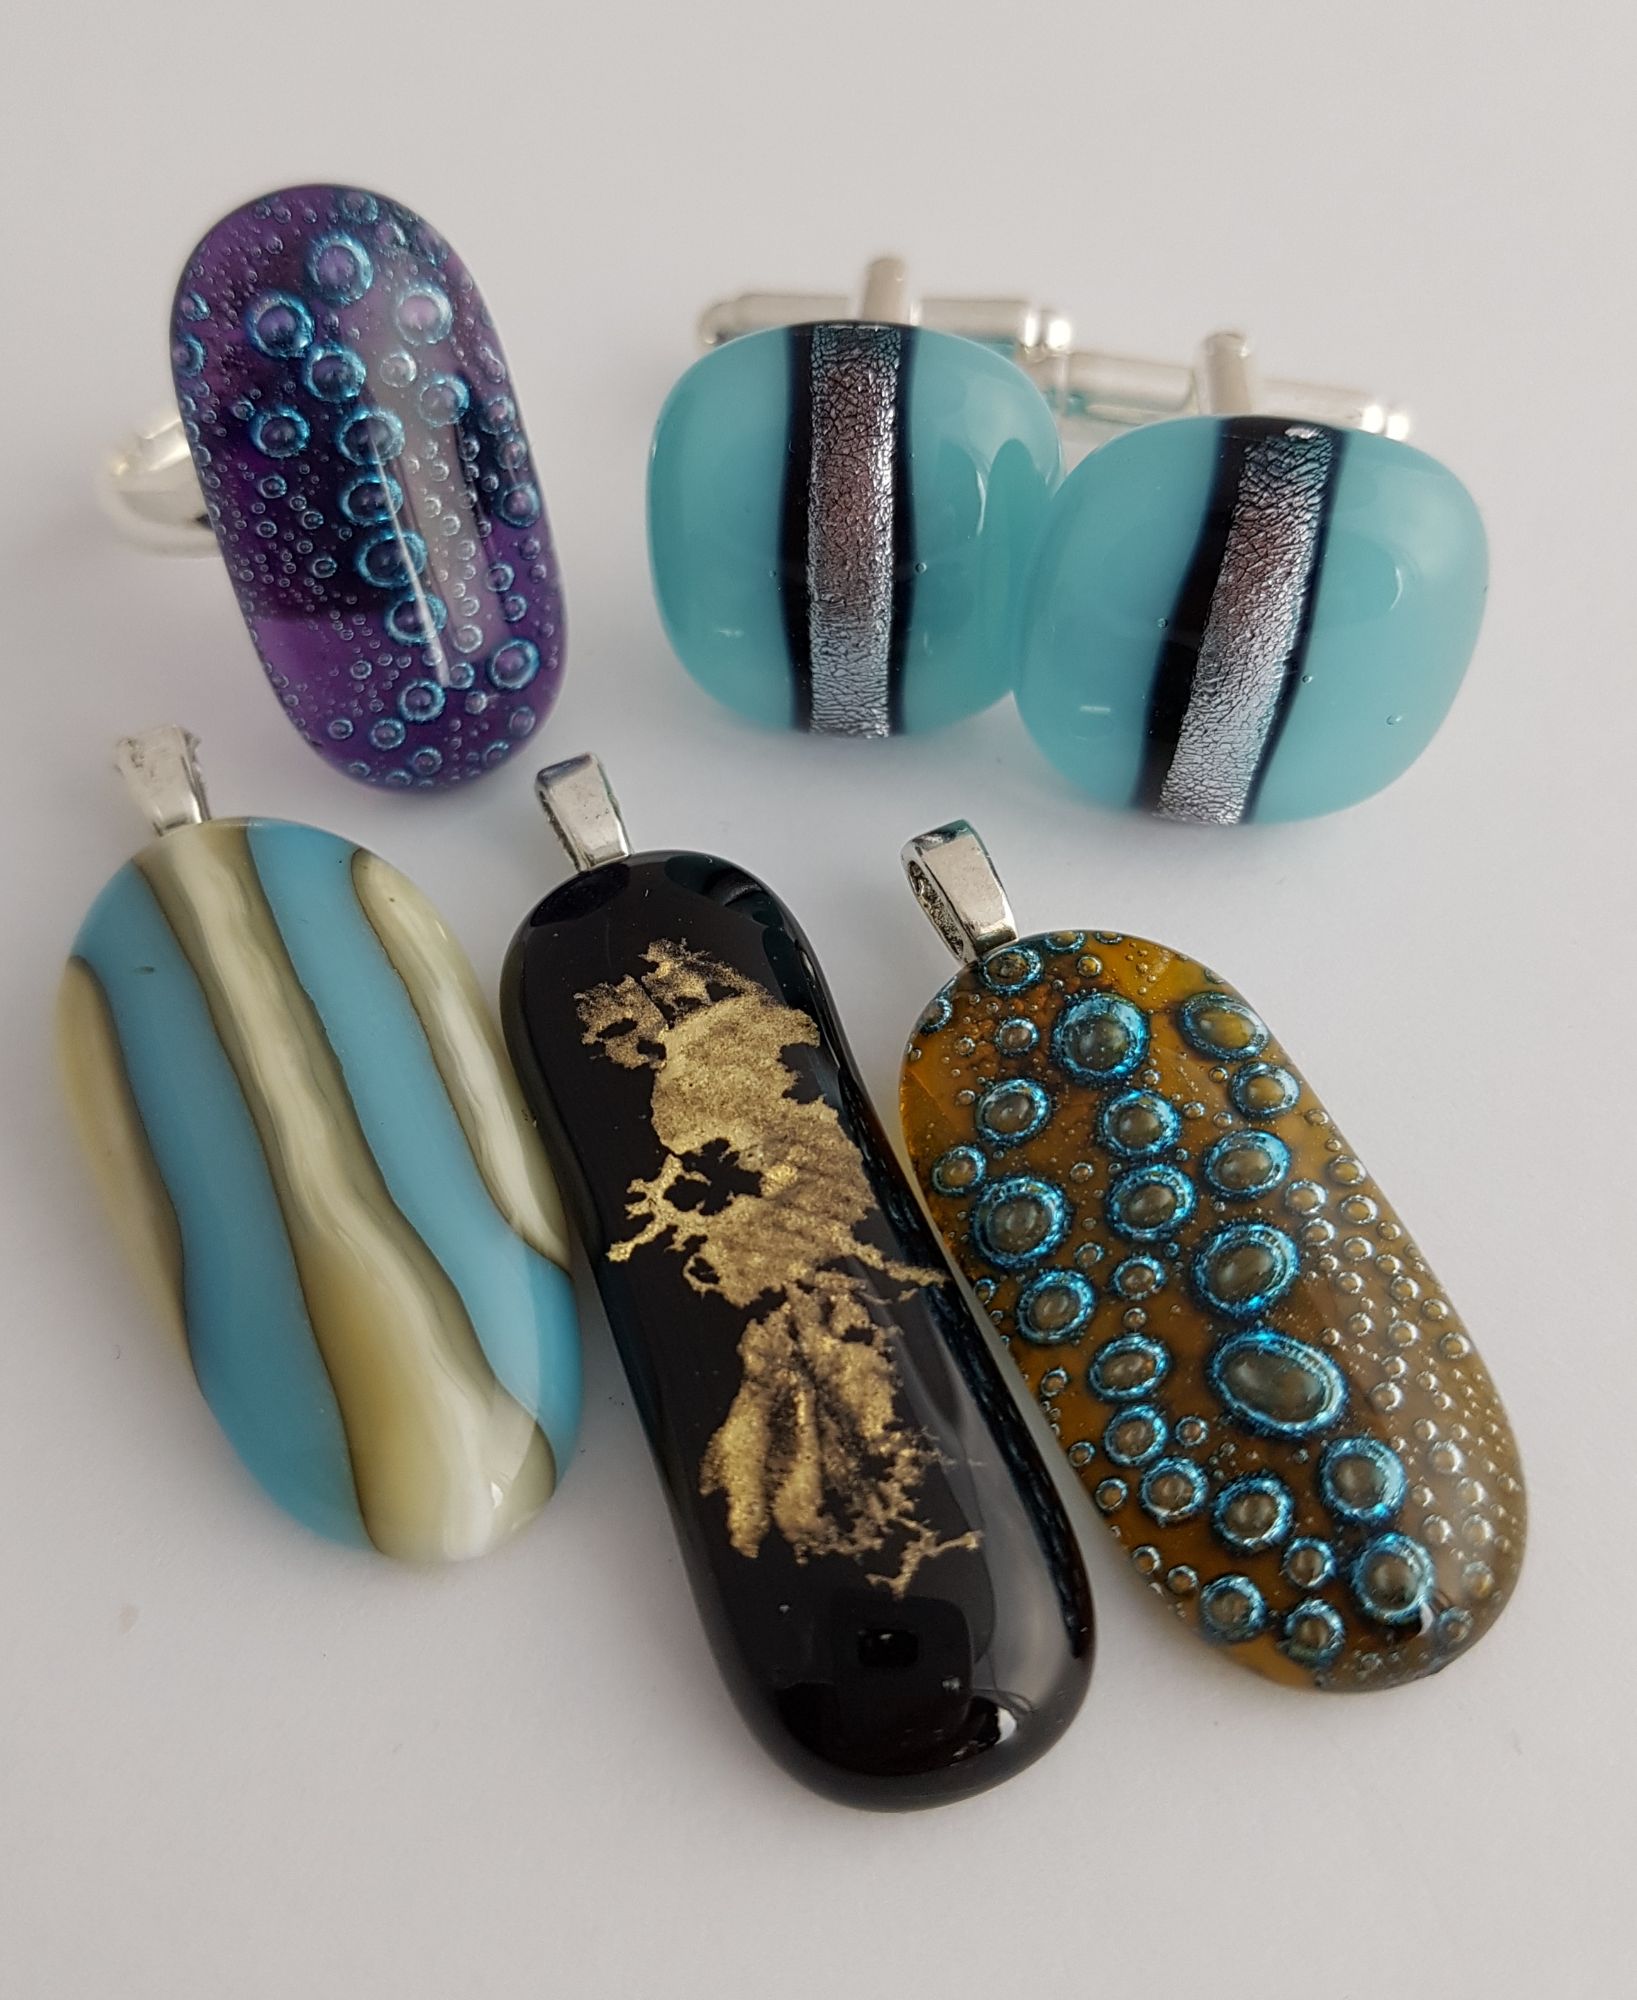 Shop for high quality handmade glass jewellery, made in Worcester, UK